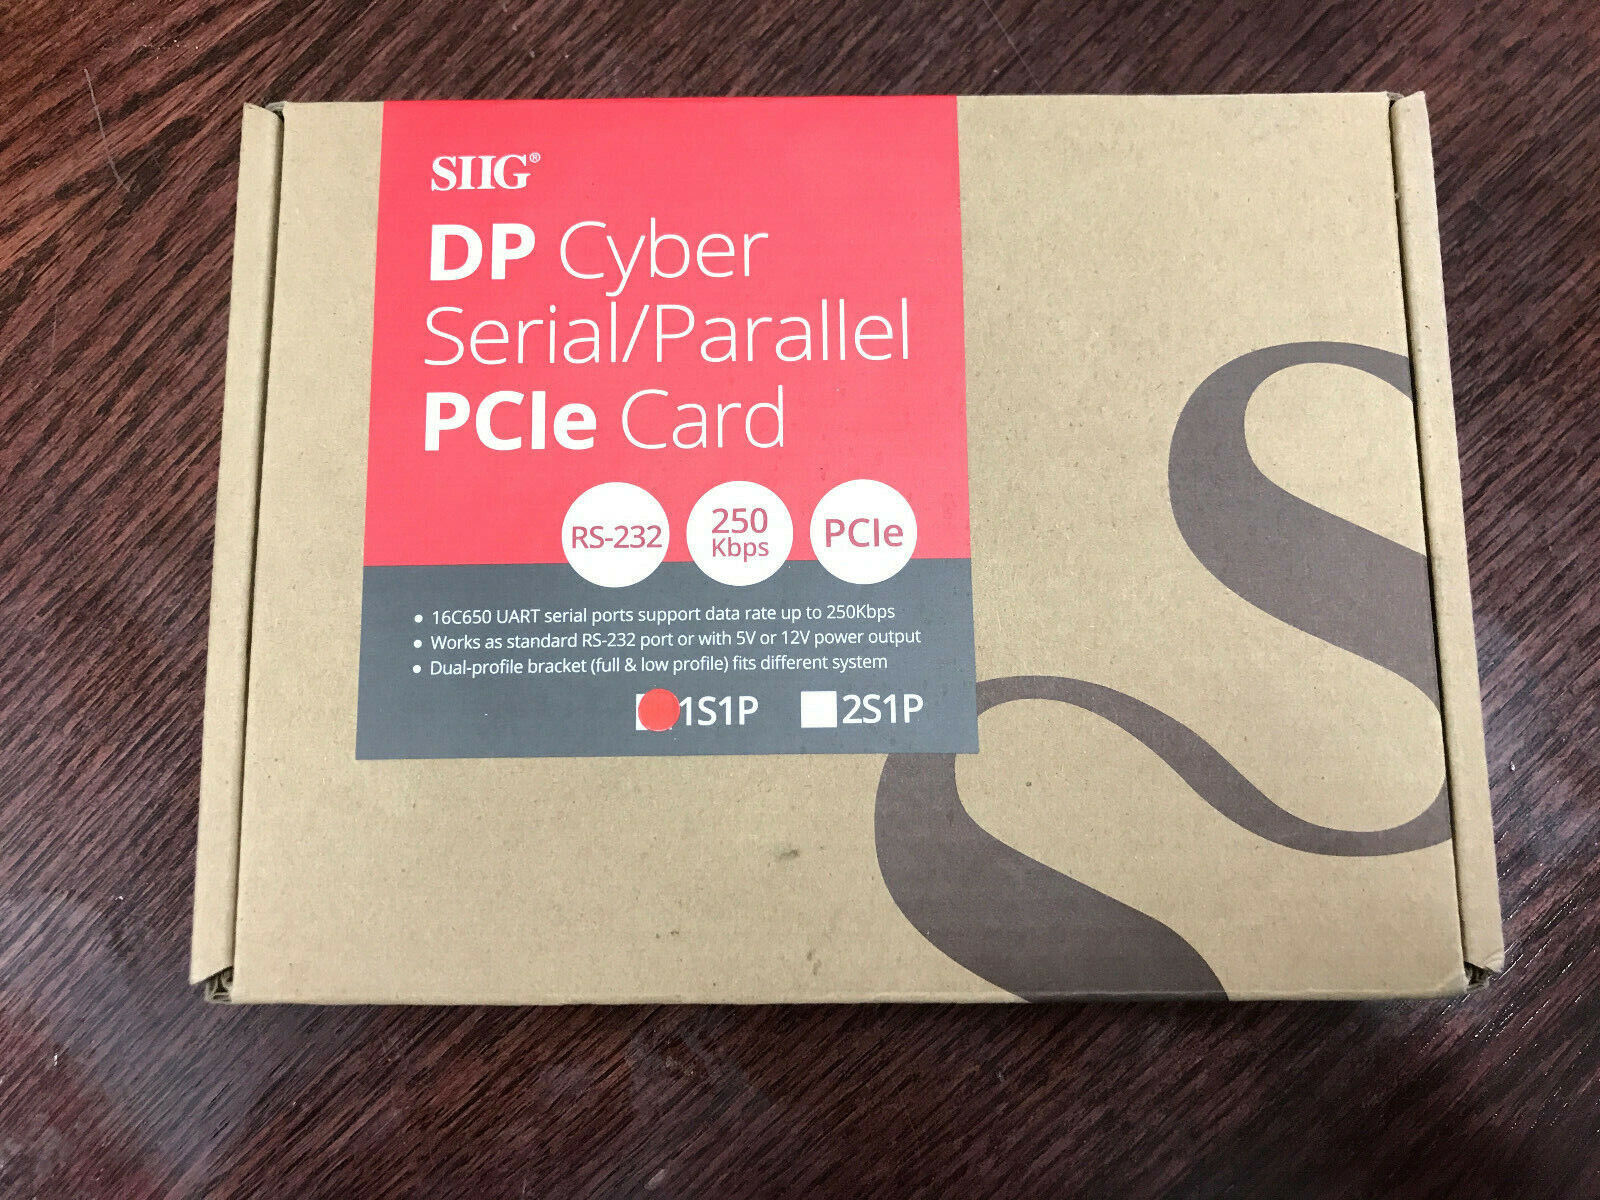 Siig JJ-E20311-S1 DP Cyber 1S1P PCIe Card Serial/Parallel Combo Adapter